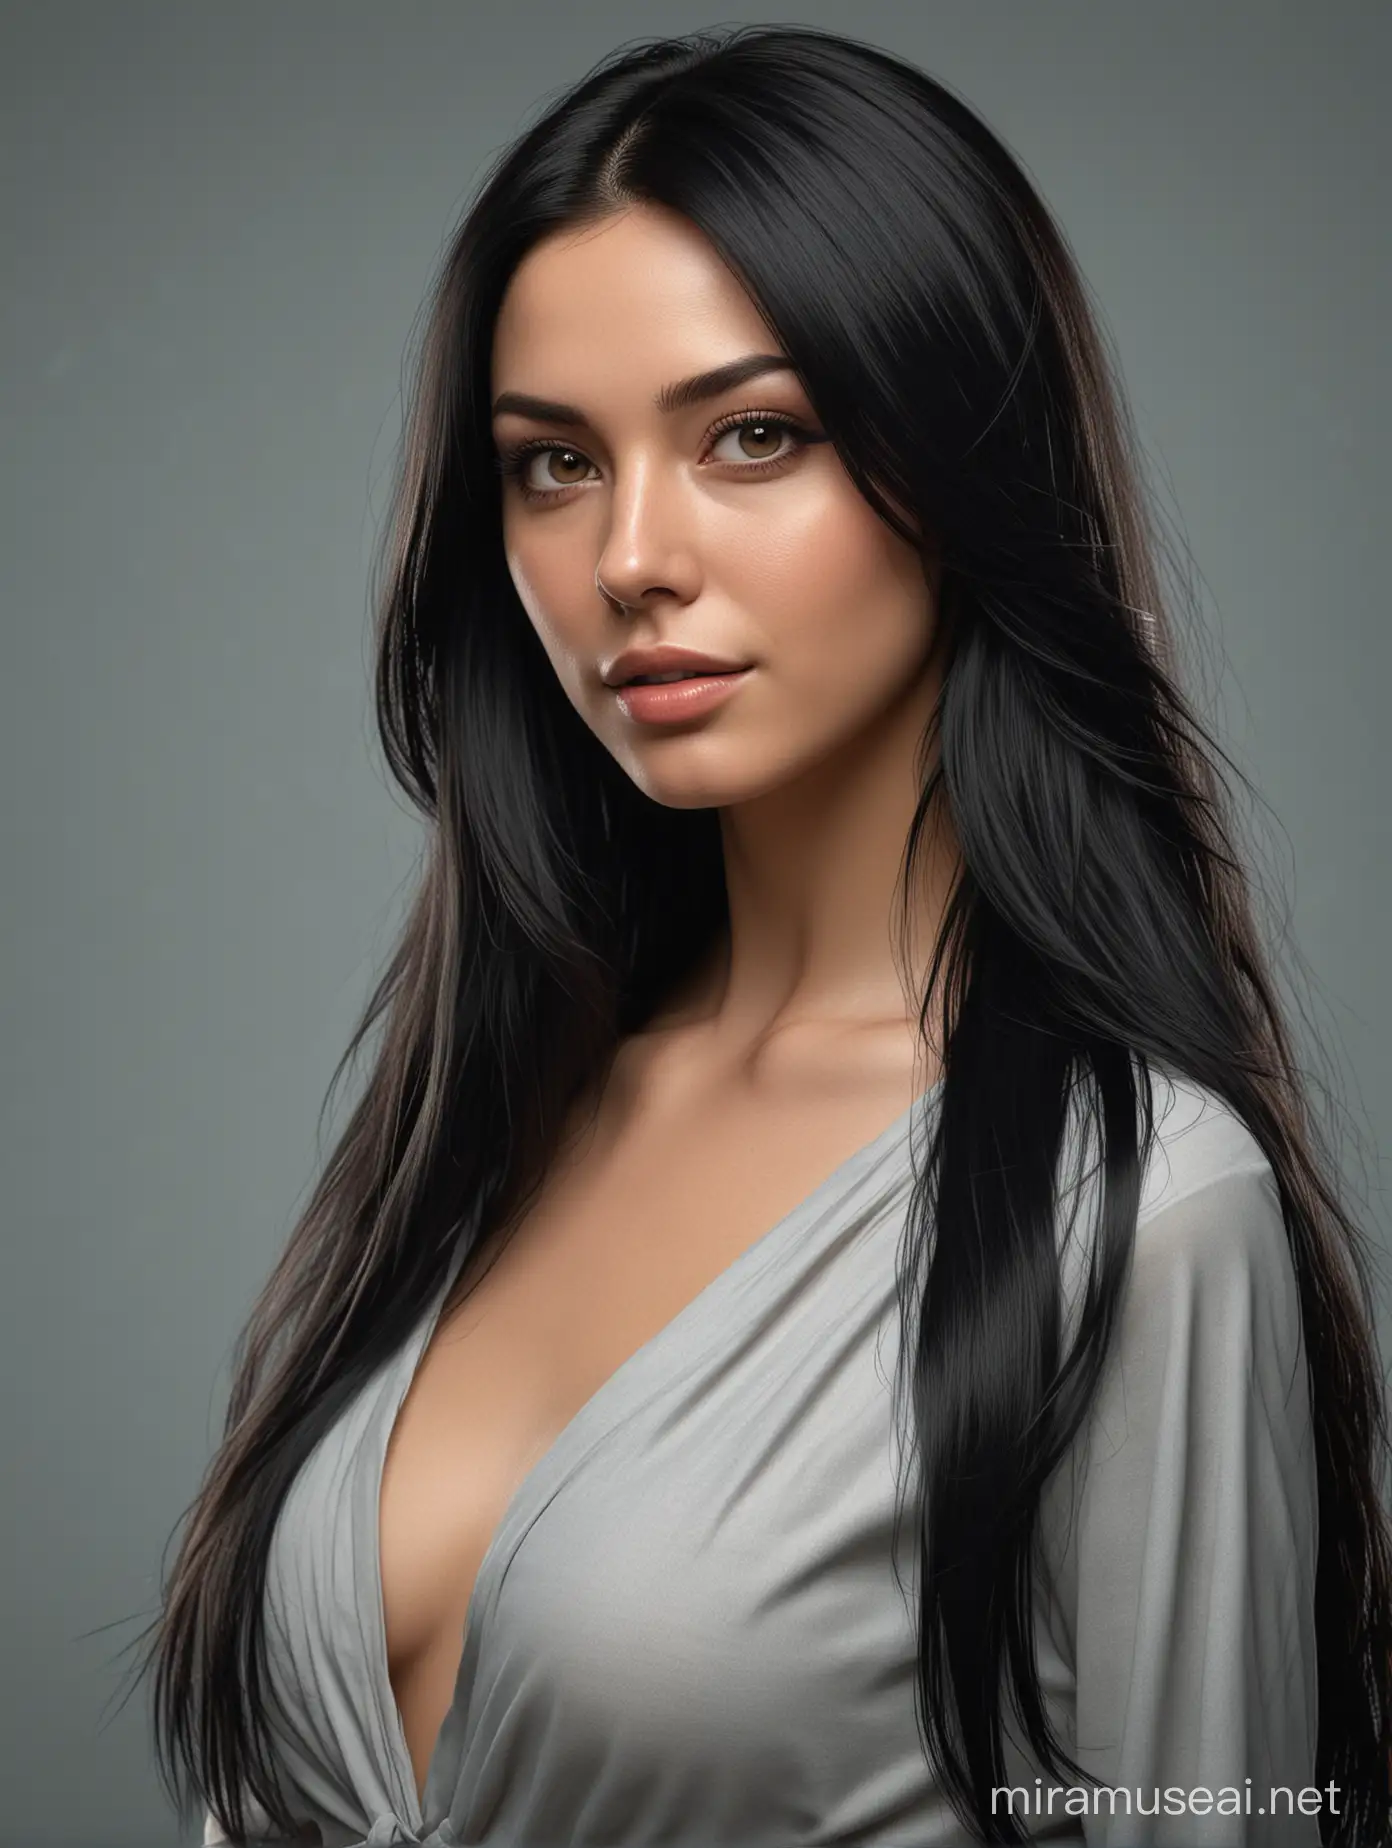 a woman with long black hair posing for a picture, realistic maya